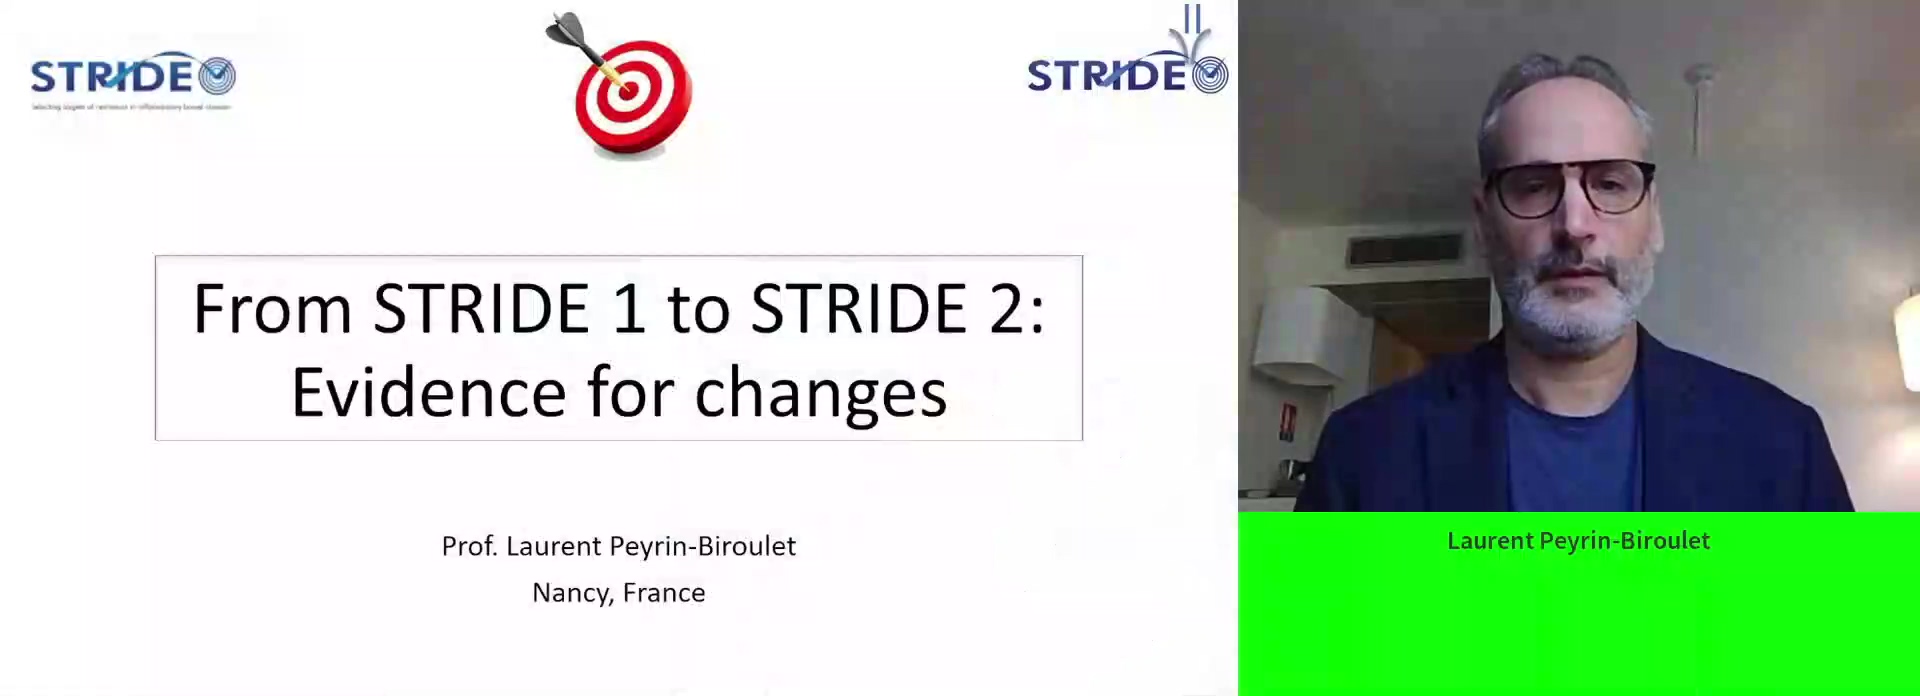 From STRIDE 1 to STRIDE 2: Evidence for changes